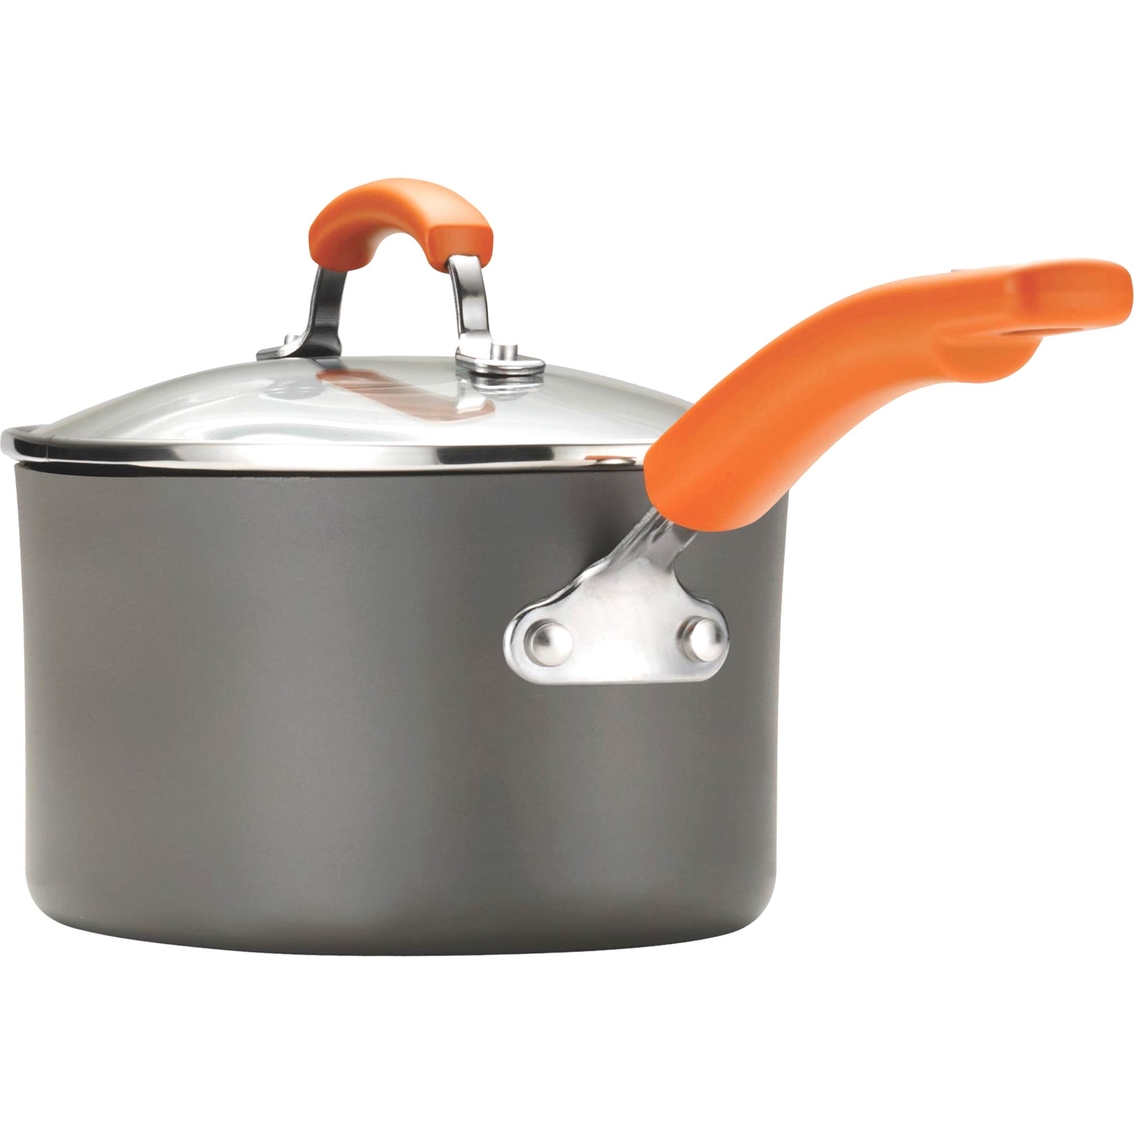 Rachael Ray Hard Anodized Nonstick 3 Quart Covered Oval Saucepan - Image 3 of 4